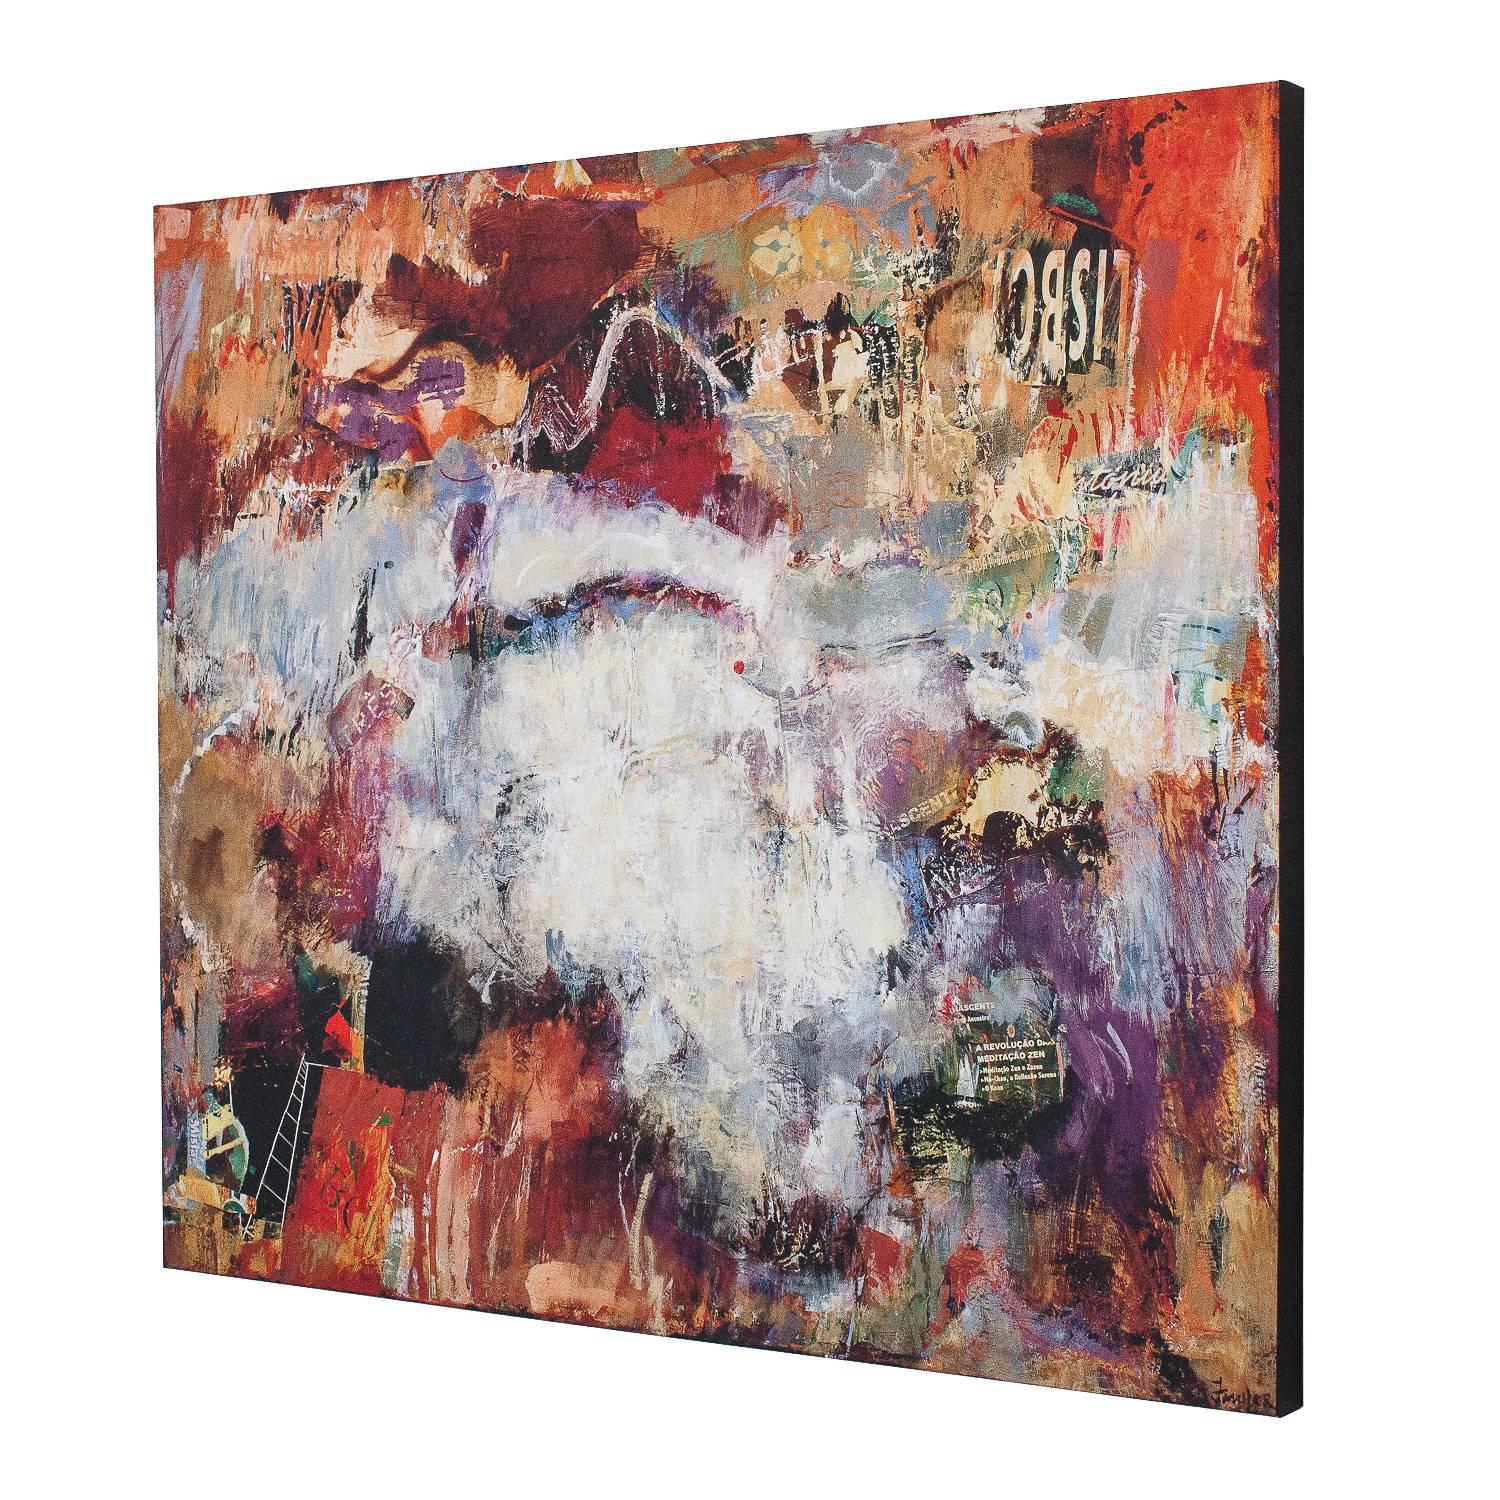 Archival giclee print of an original abstract painting by Happy Fowler. Titled "Off The Wall". 52" x 60" Abstract Expressionist painting and collage in orange, purple, yellow, and white colors throughout. Unframed. Stretched